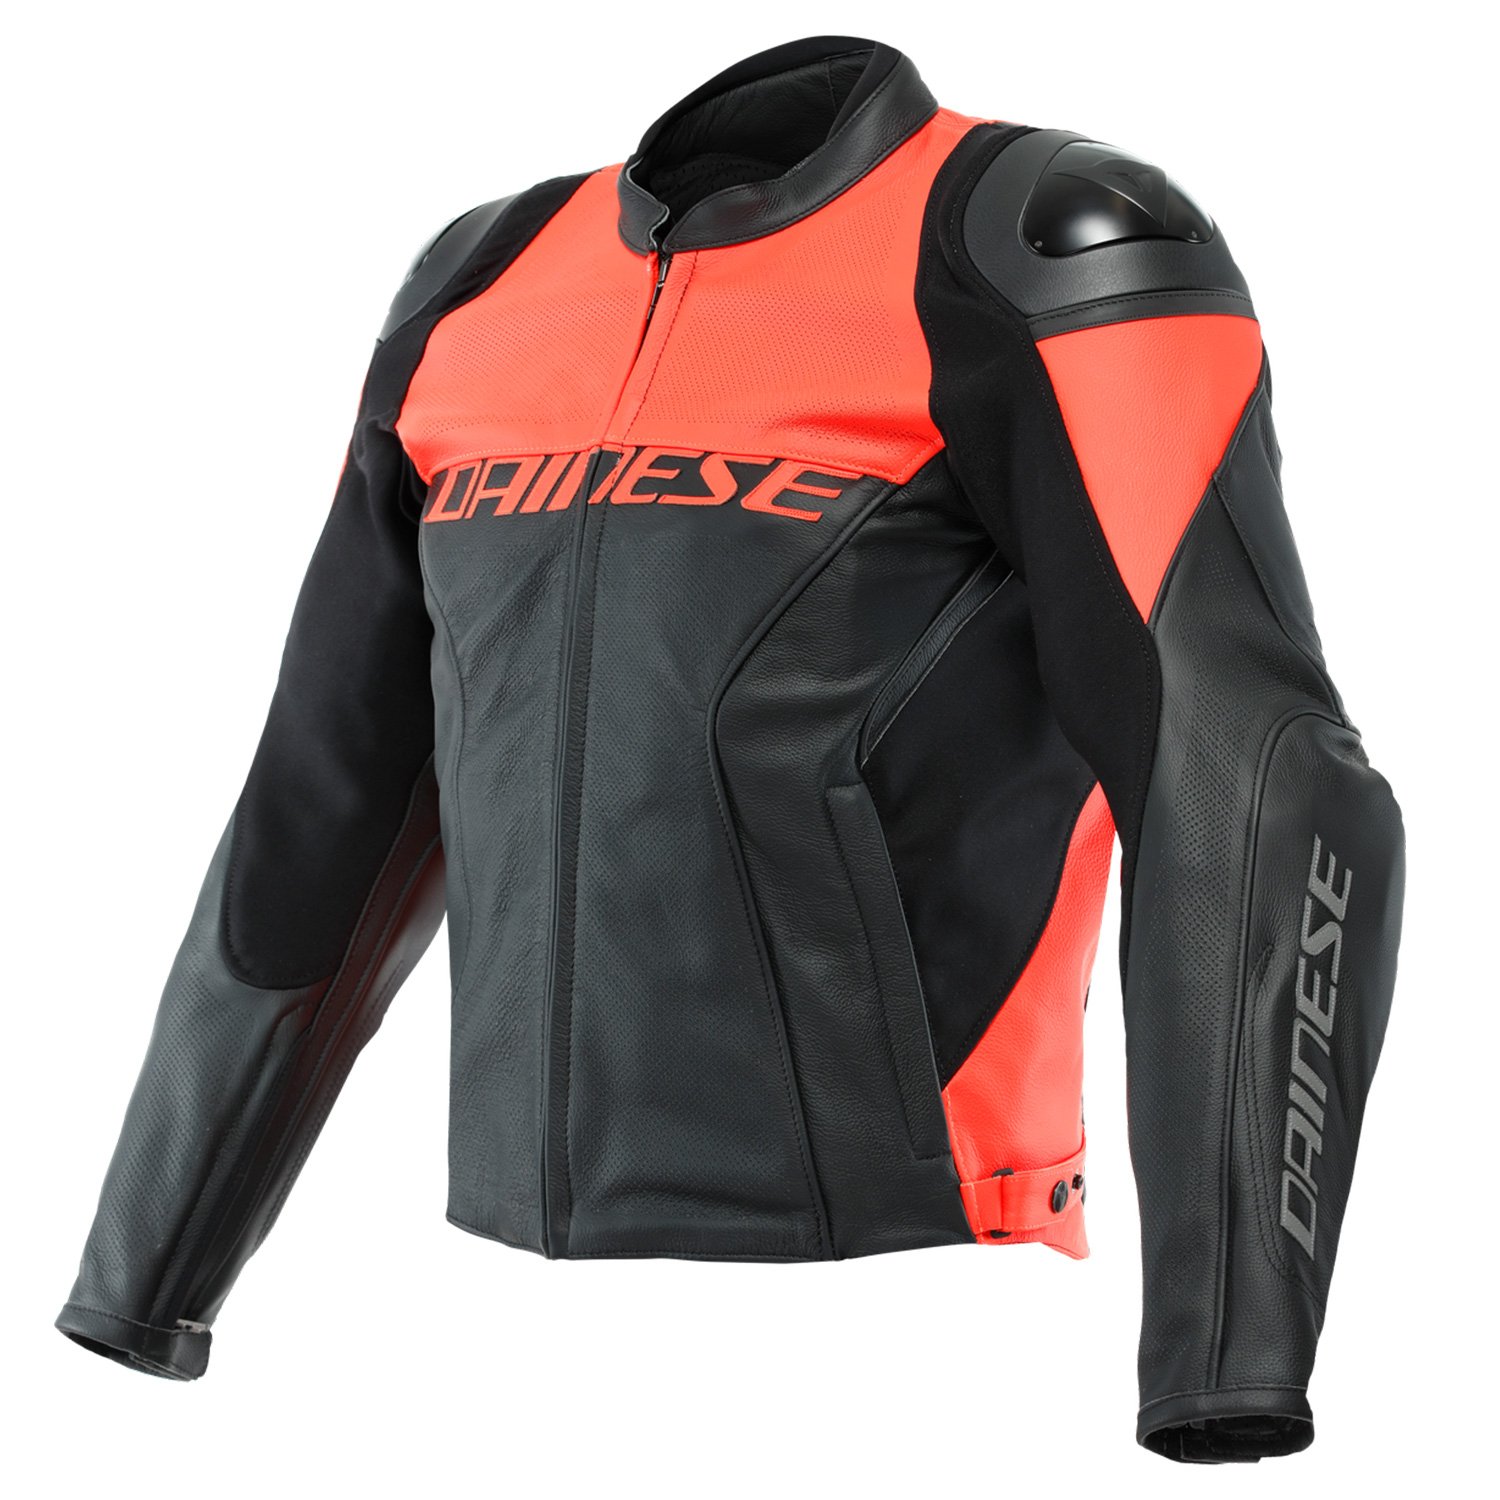 Image of Dainese Racing 4 Perforated Leather Schwarz Fluo Rot Jacke Größe 54